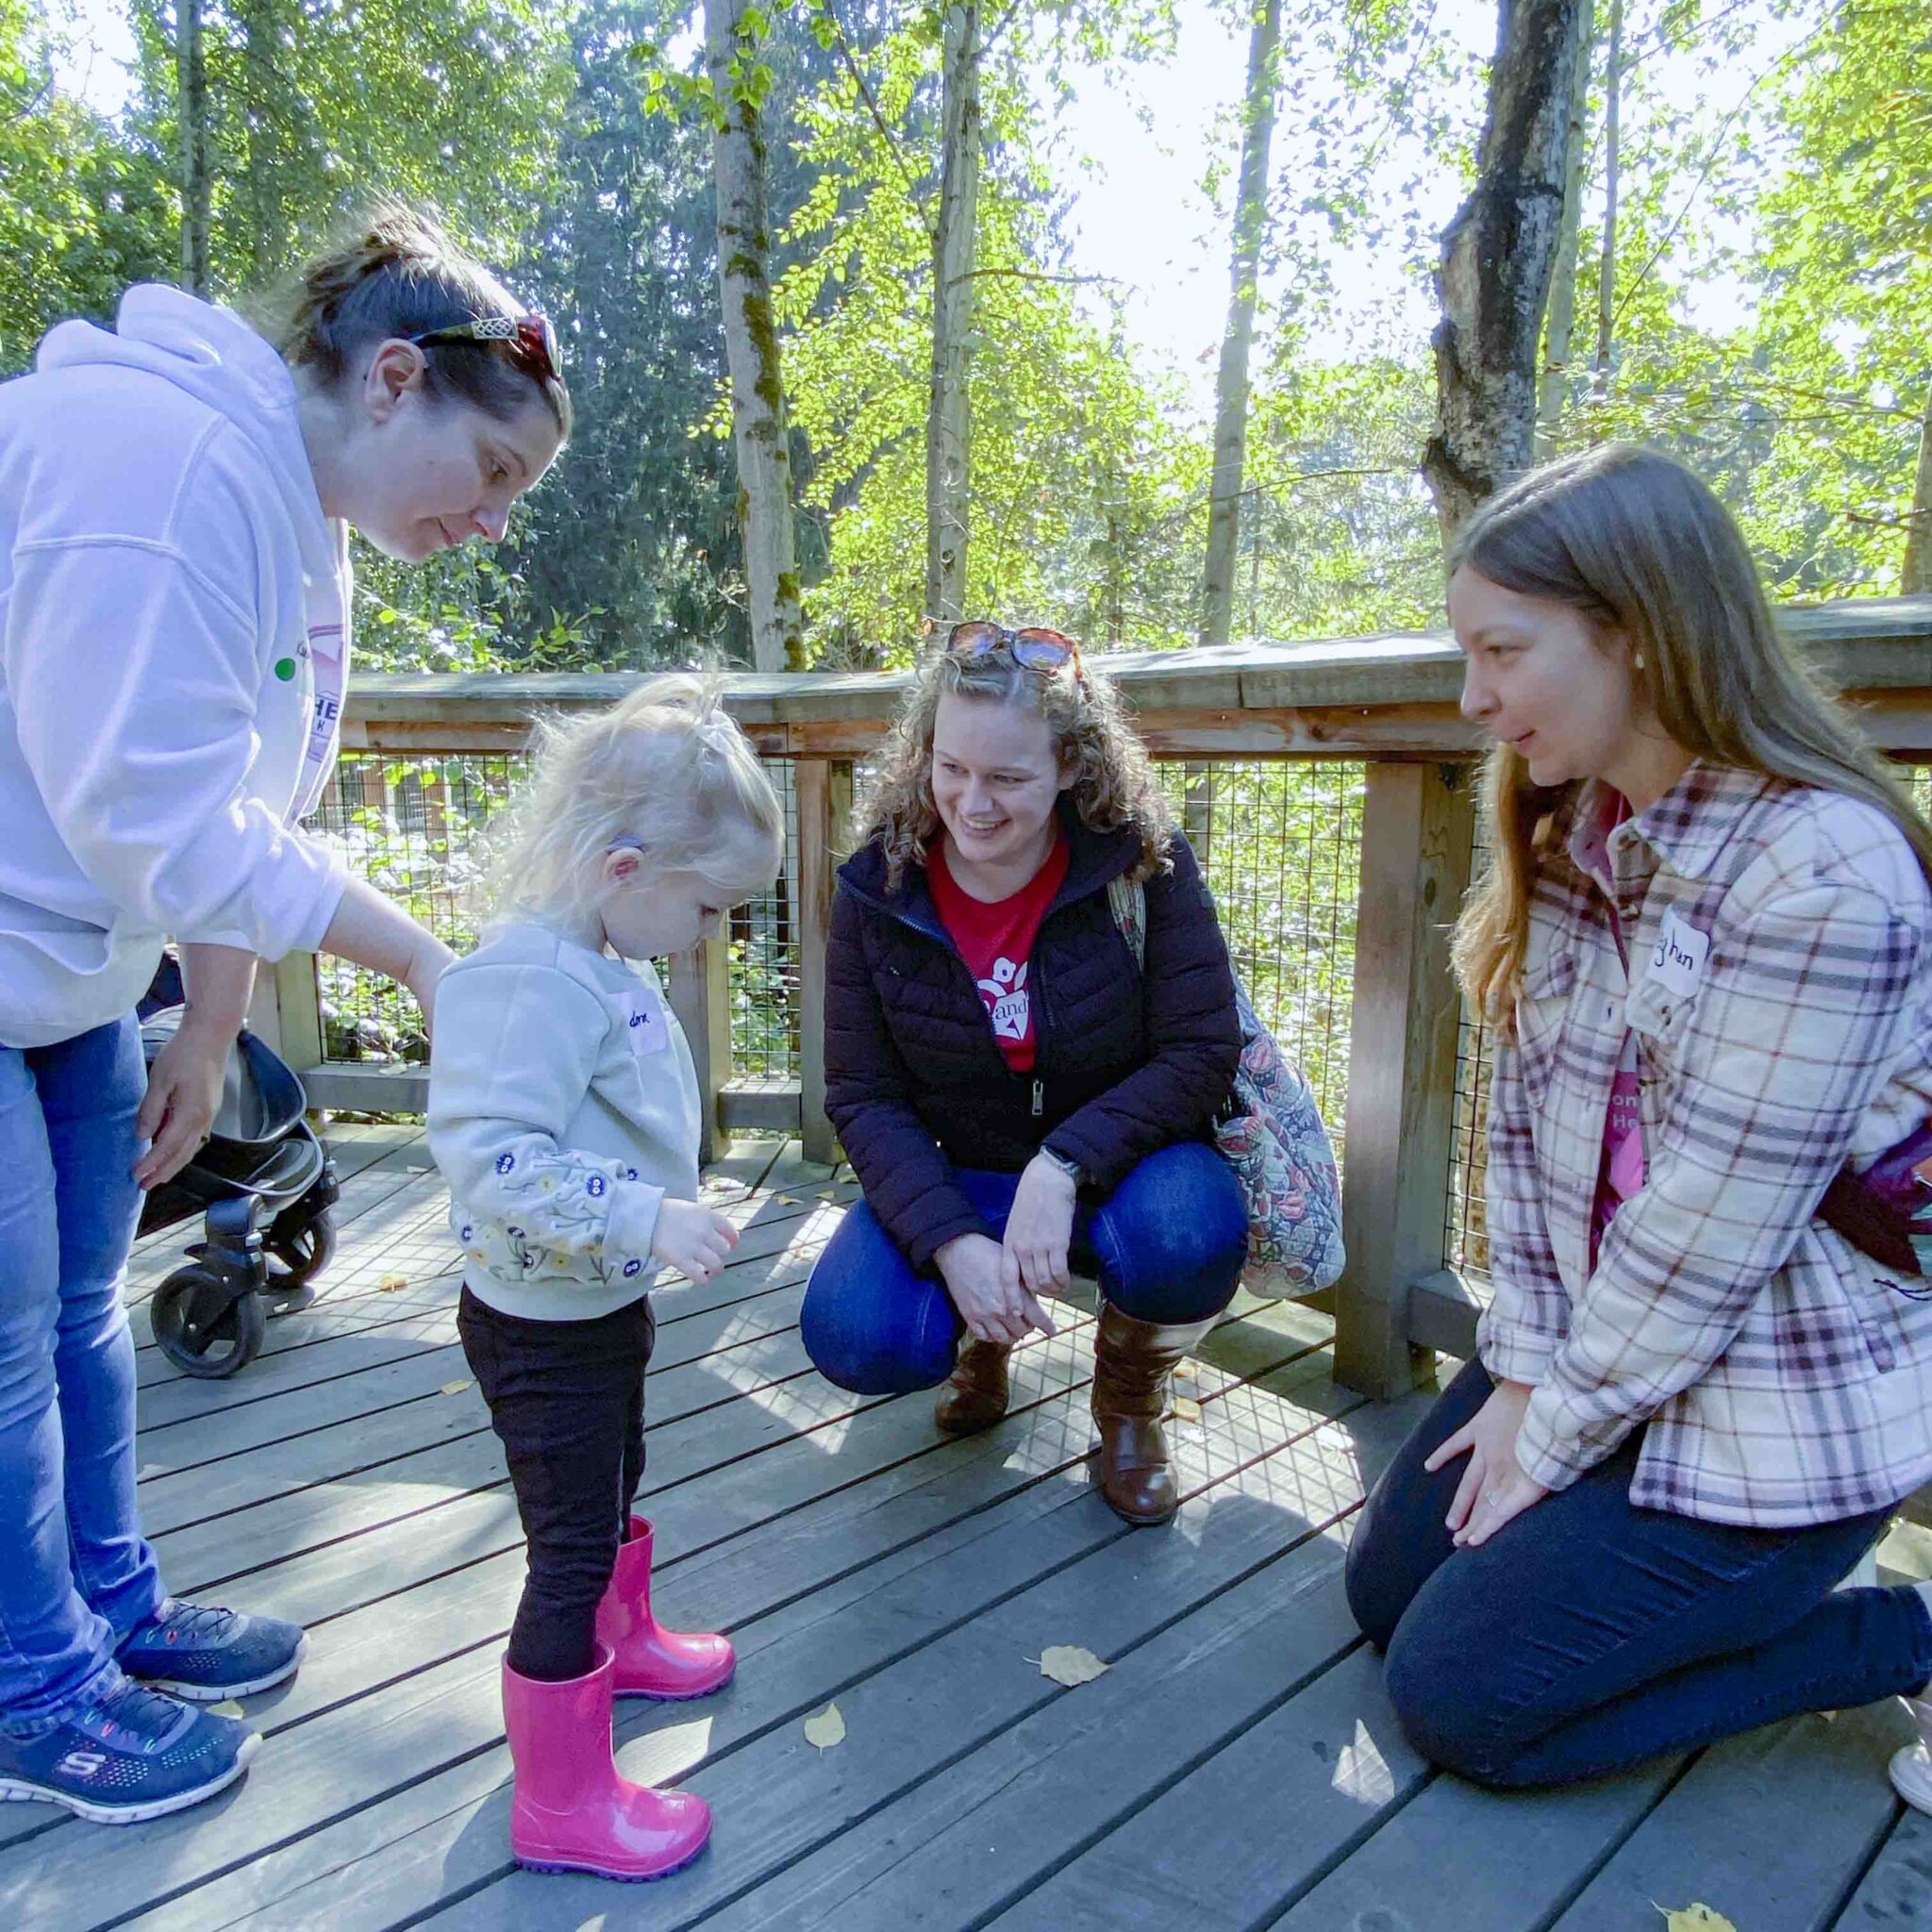 Three adults interact with a deaf child playing on a wooden boardwalk